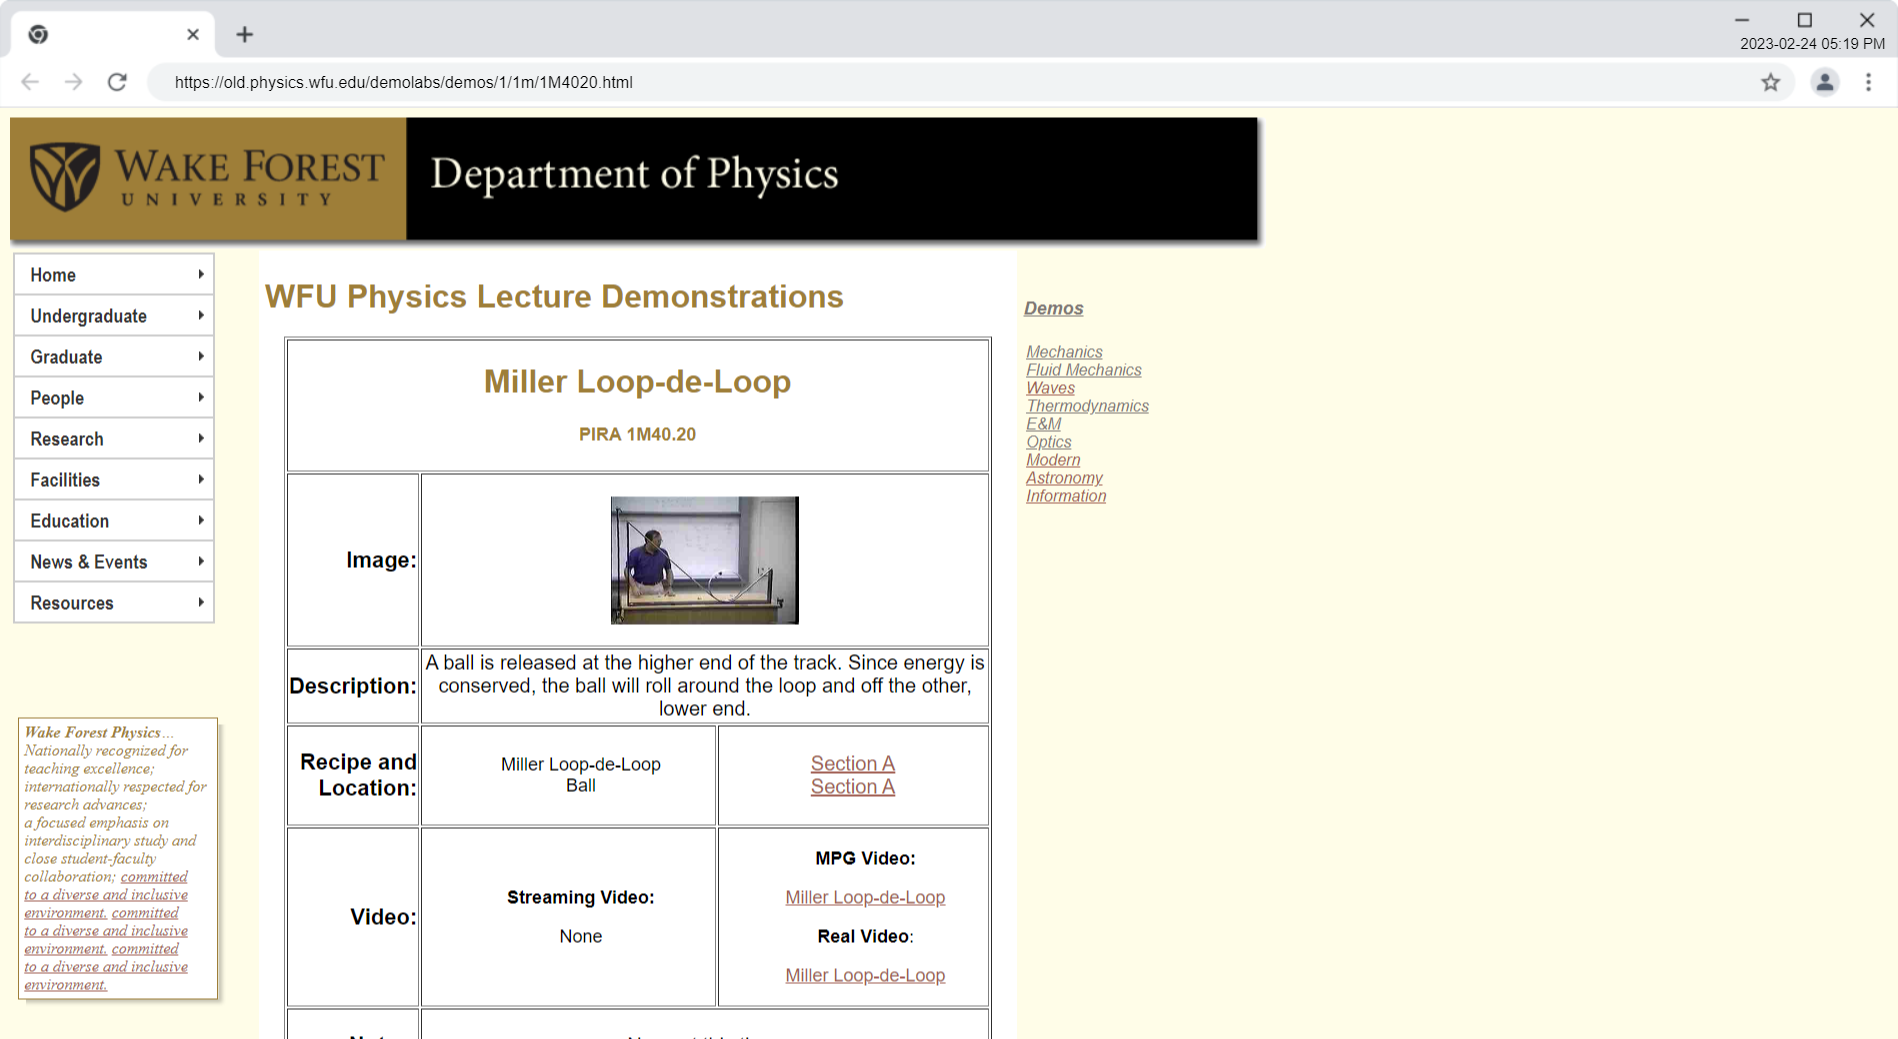 WFU Physics Lecture Demonstrations